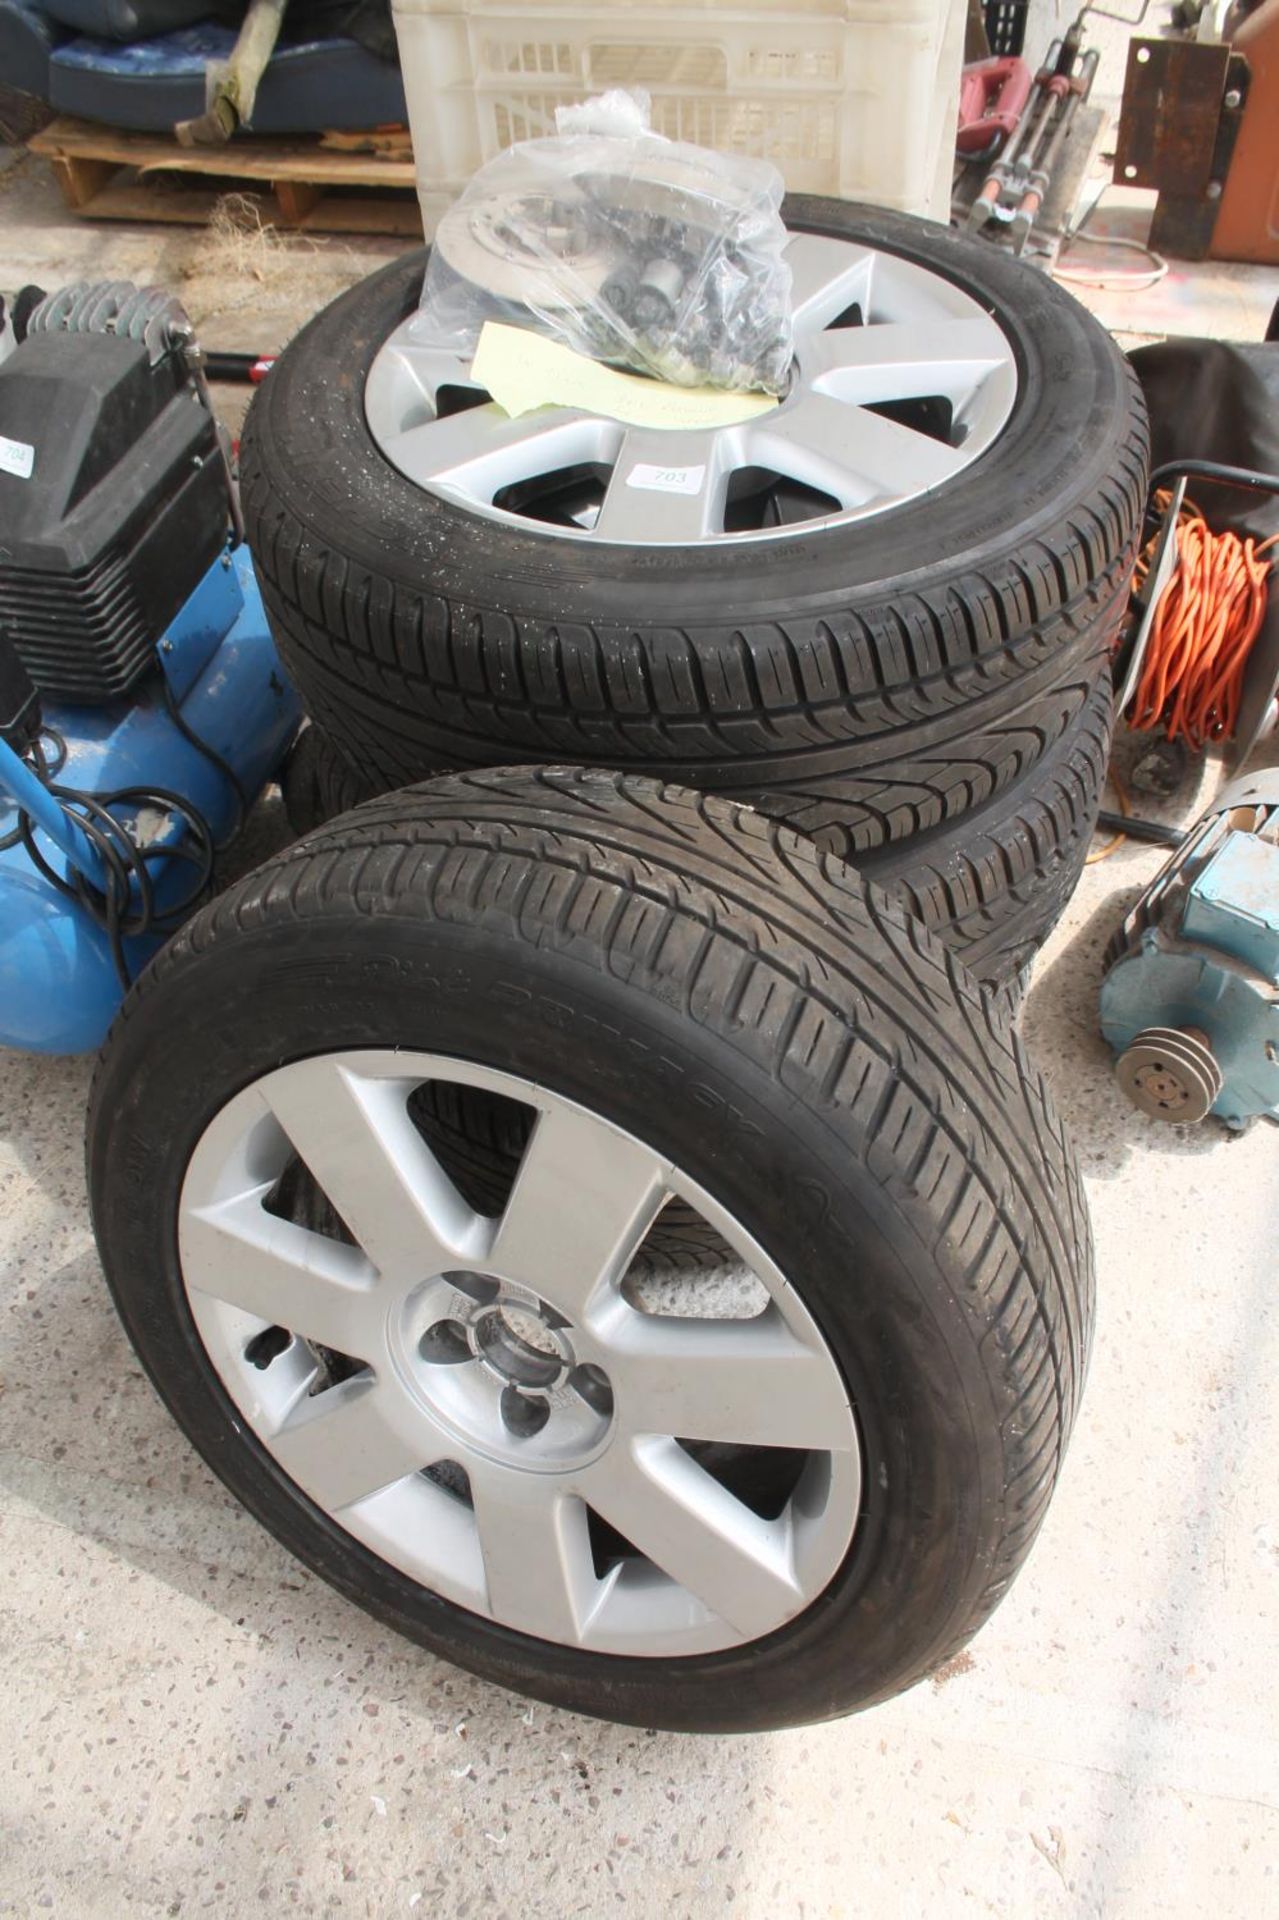 4 AUDI WHEELS AND TYRES 205/55 R16 91W NO VAT